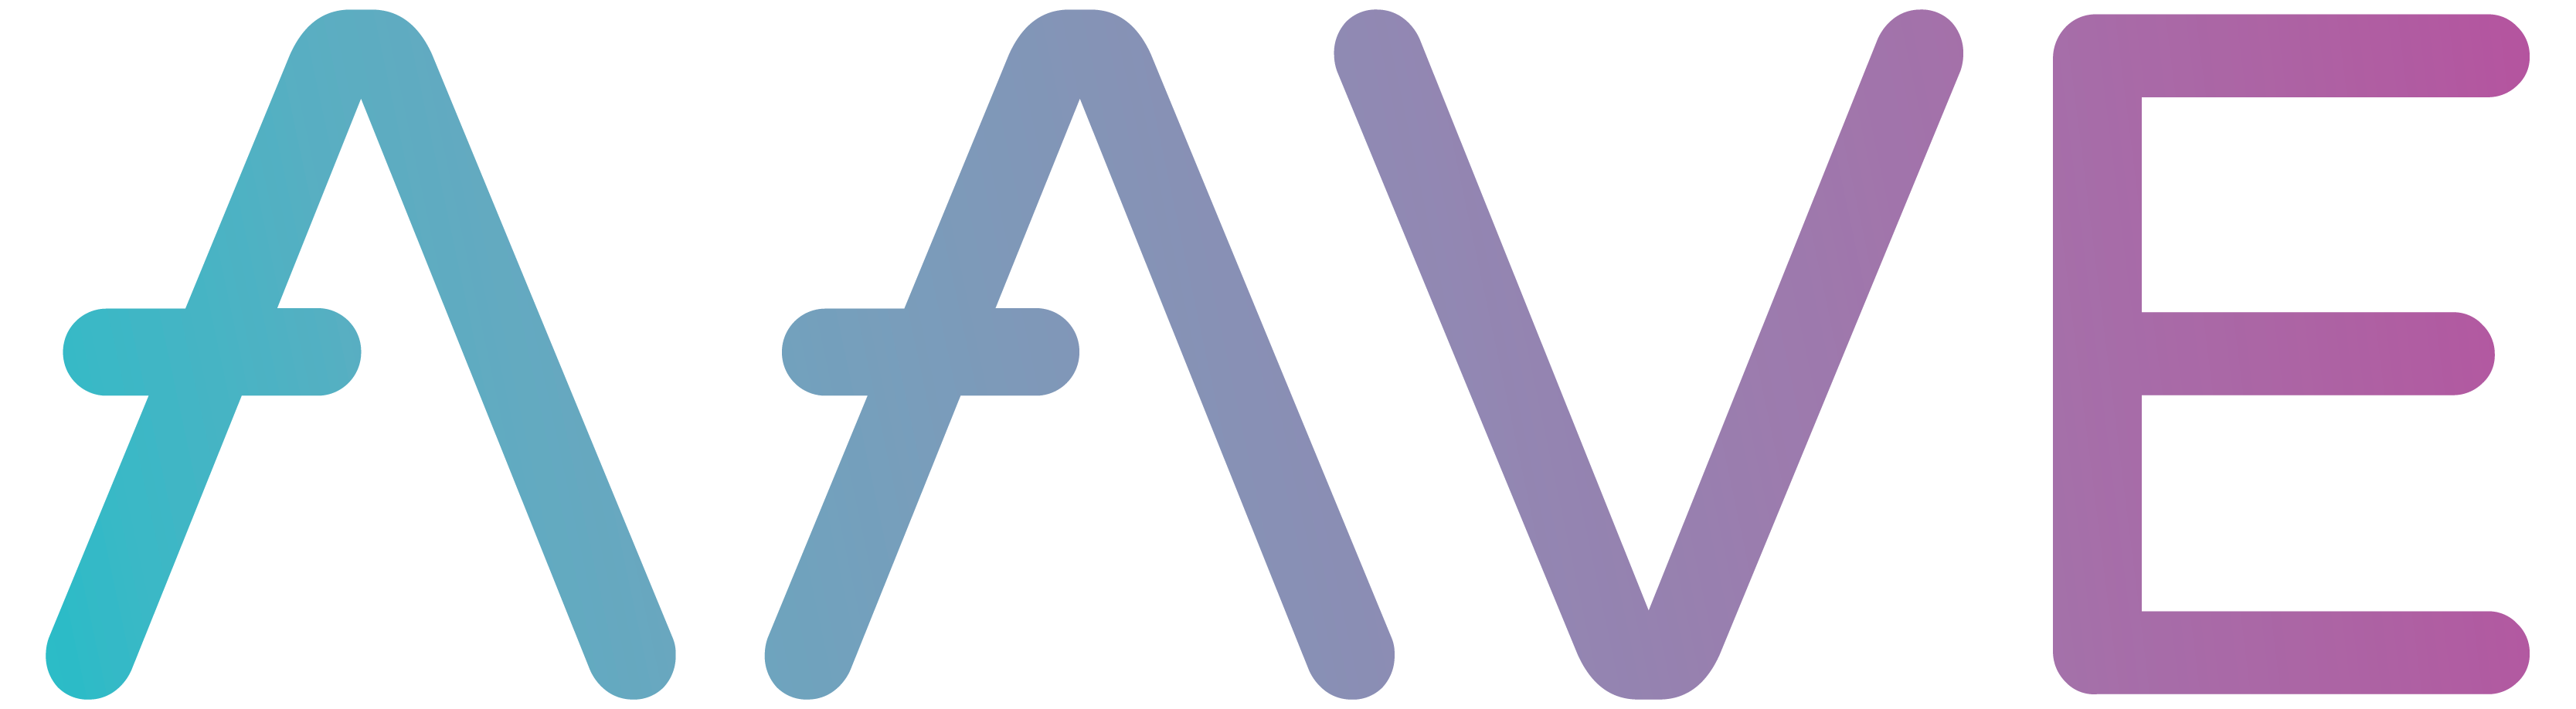 Aave Crypto Logo PNG Image